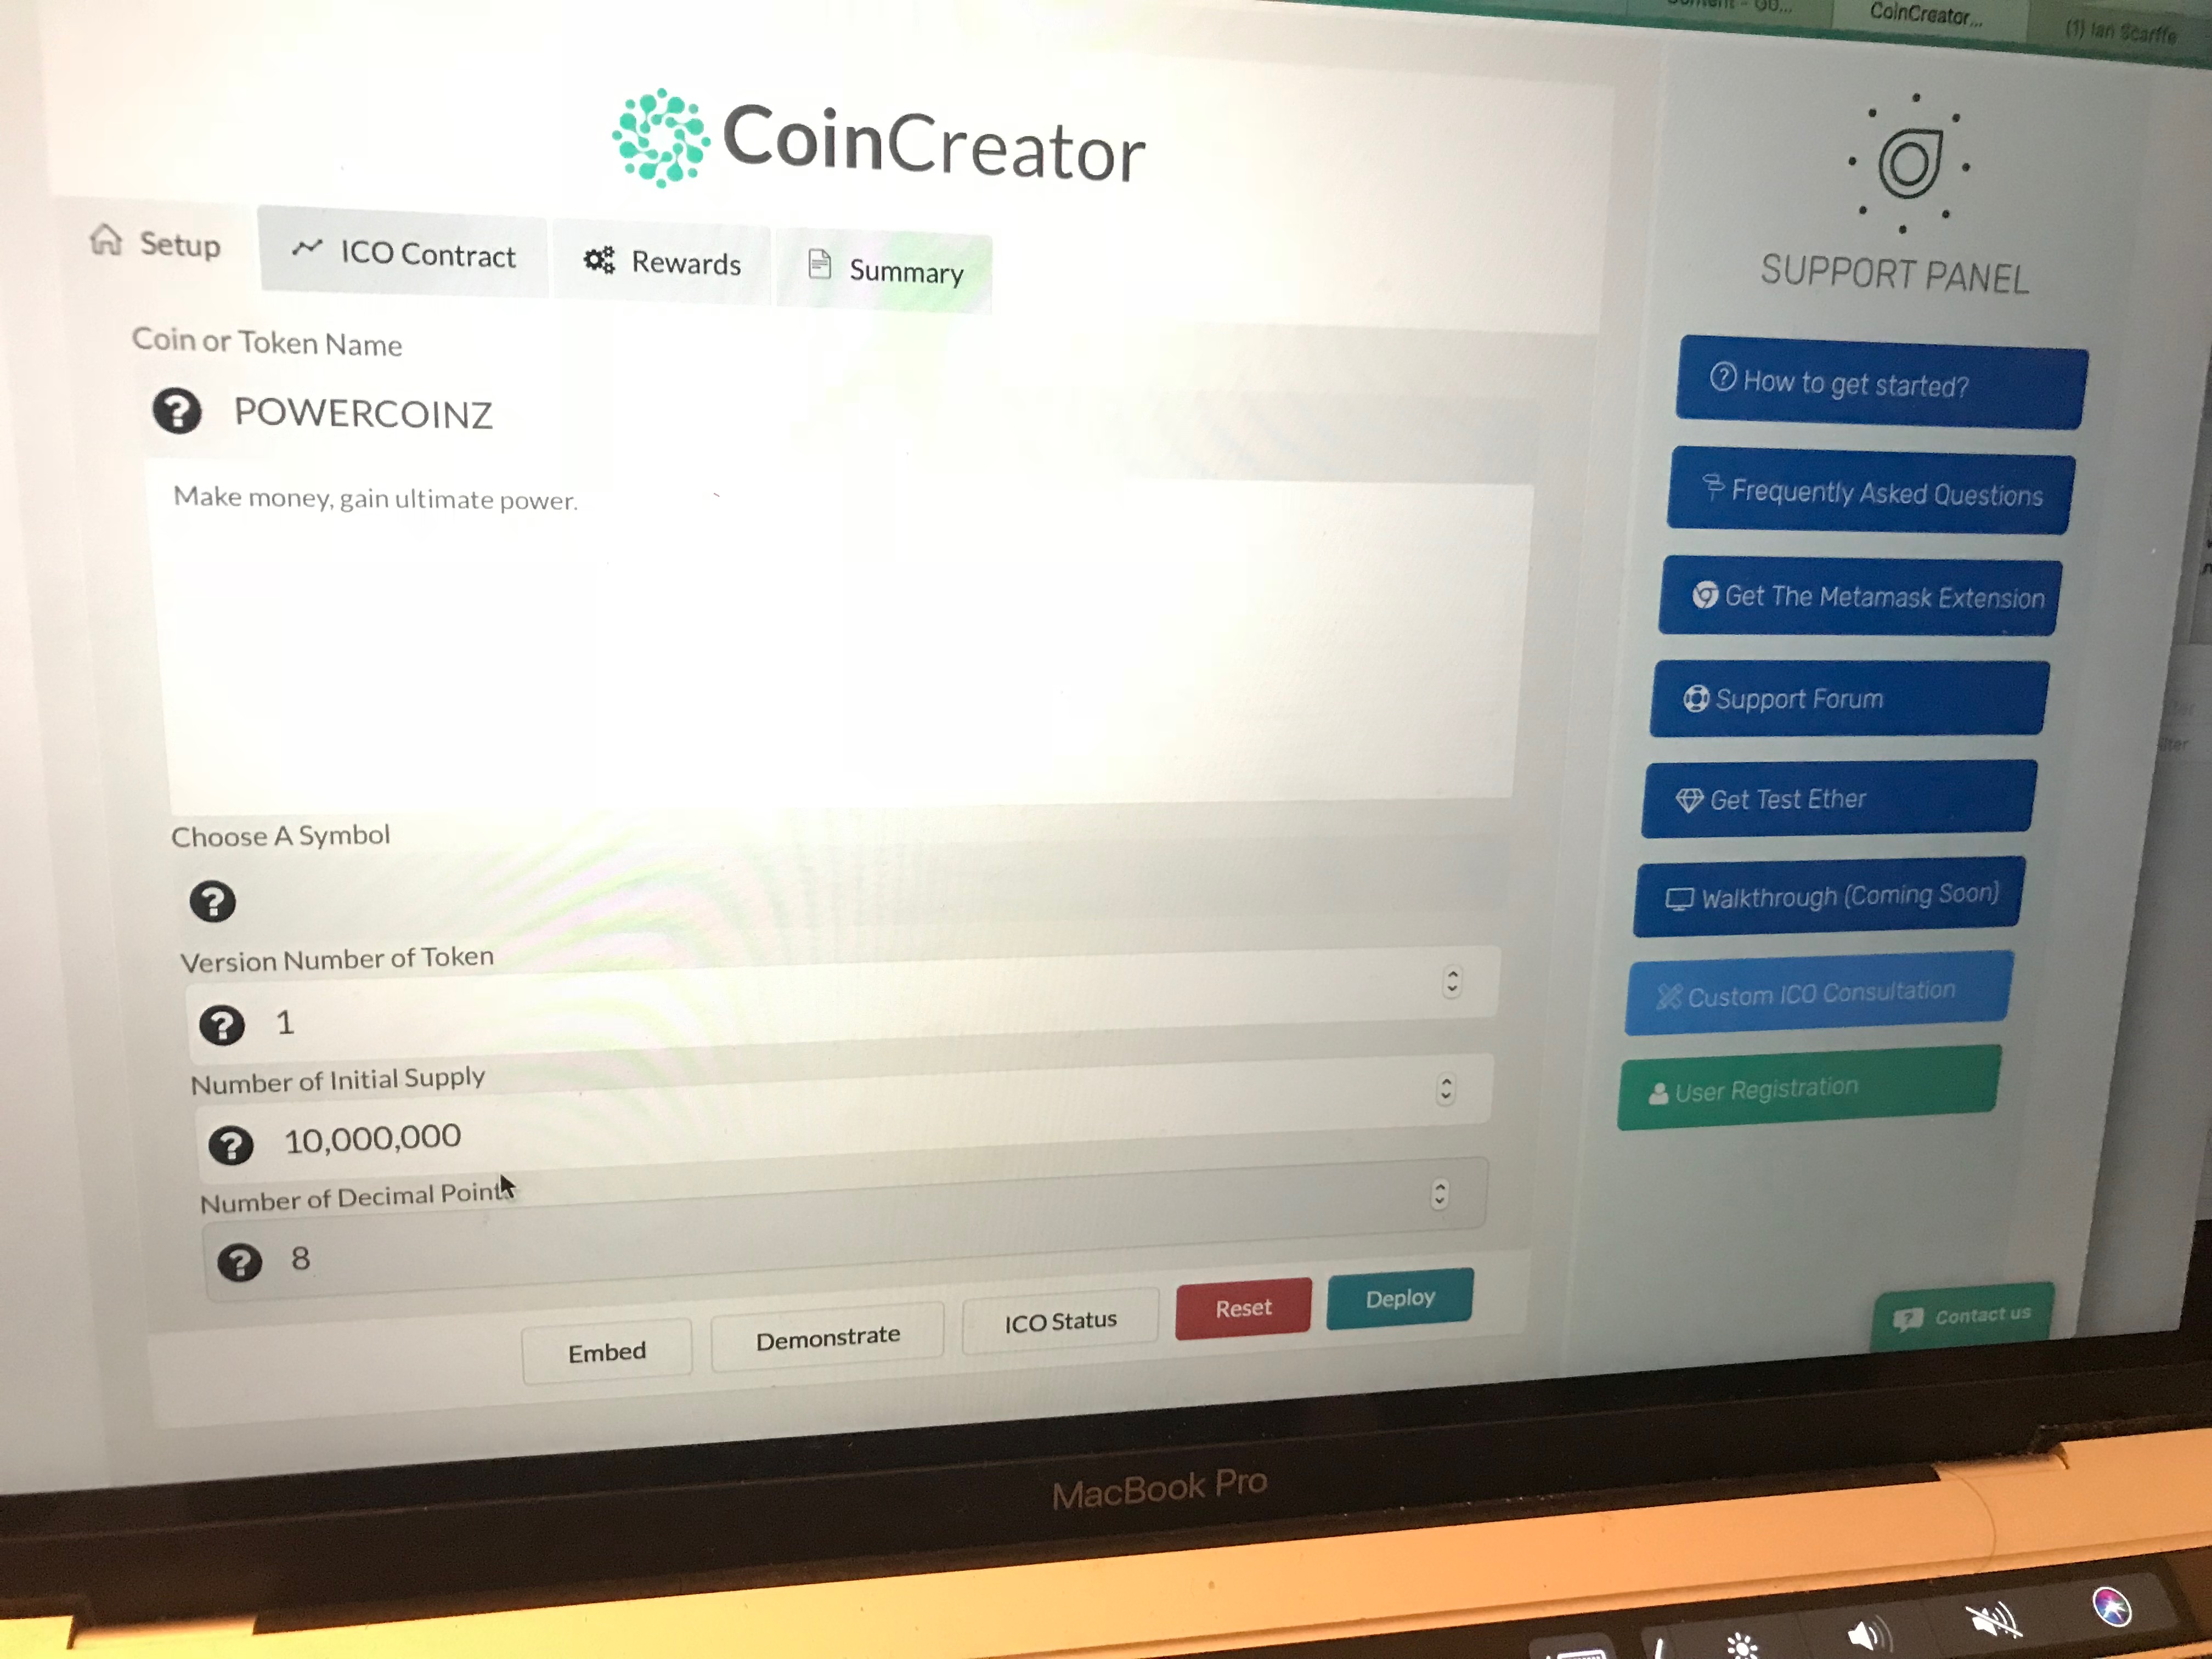 Build your own token sale with CoinLaunch’s CoinCreator